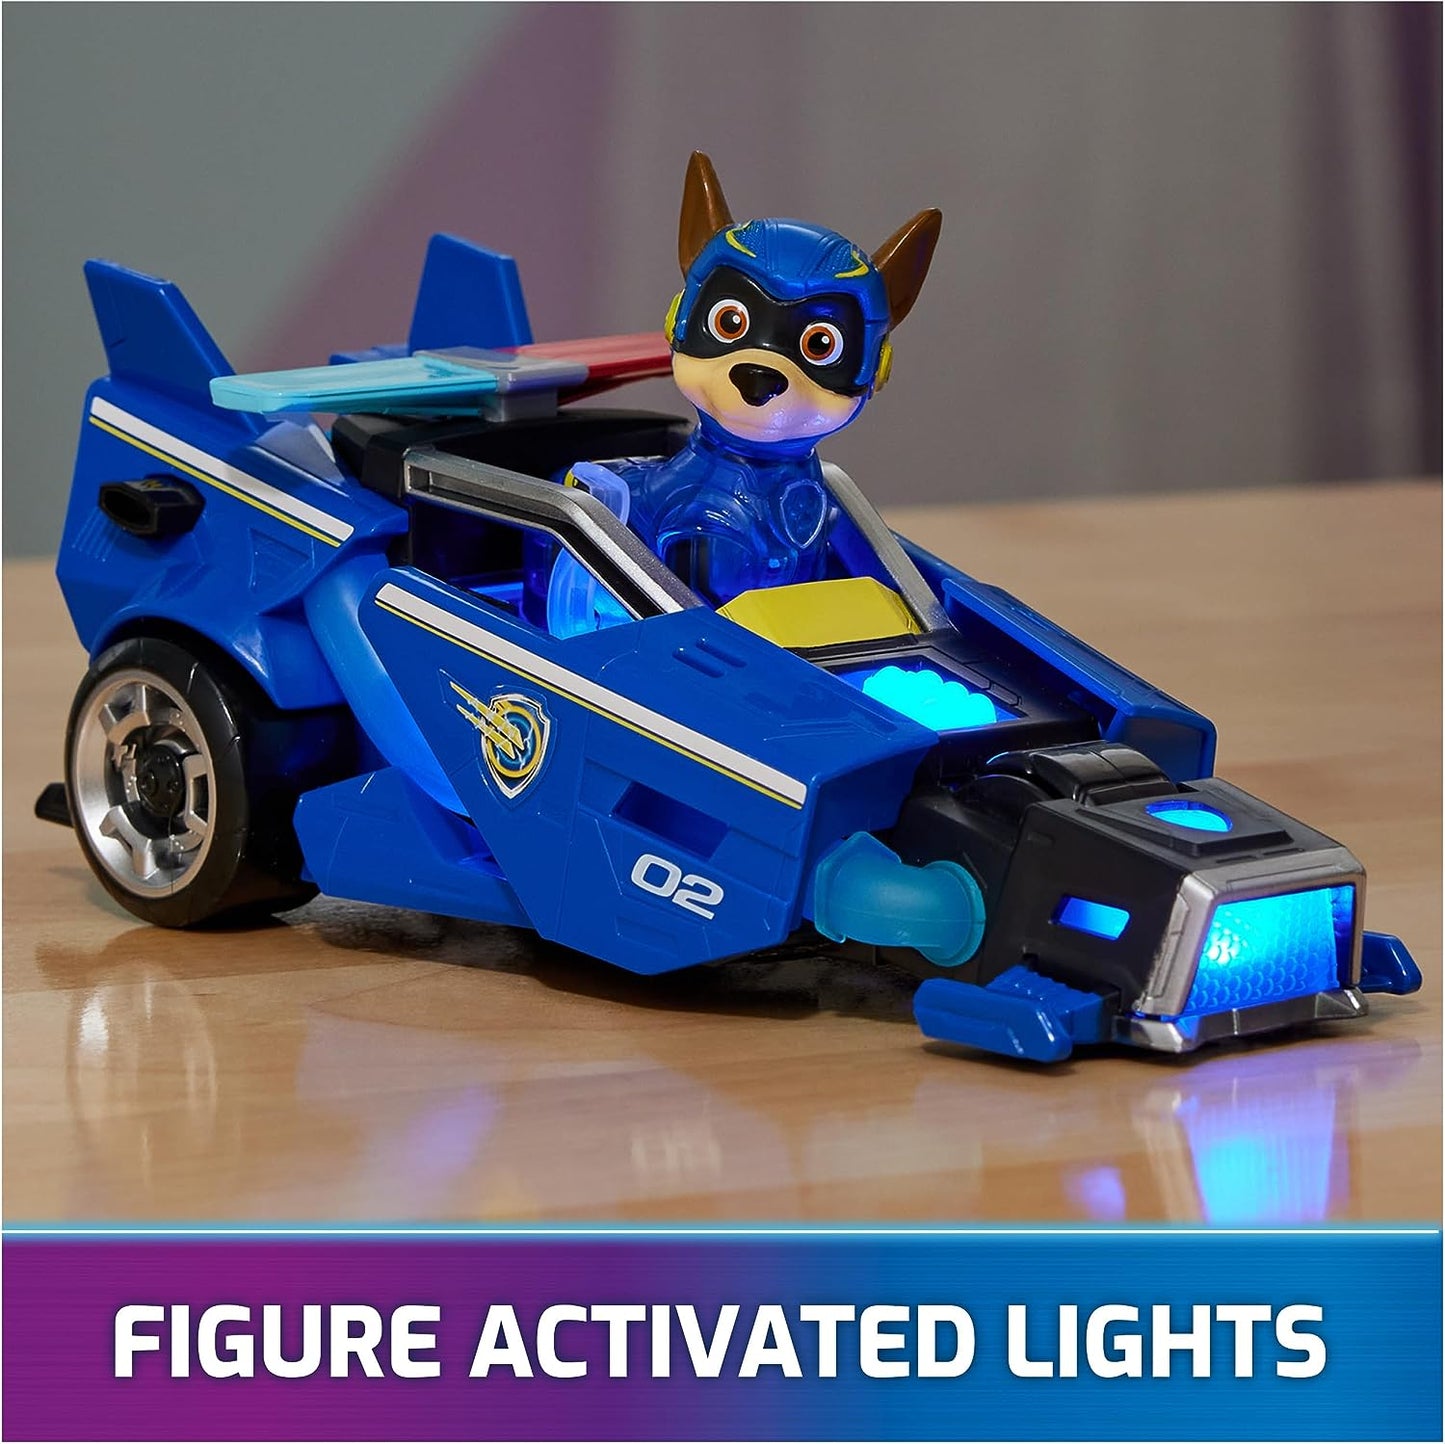 Paw Patrol: The Mighty Movie, Toy Car with Chase Mighty Pups Action Figure, Lights and Sounds, Kids Toys for Boys & Girls 3+